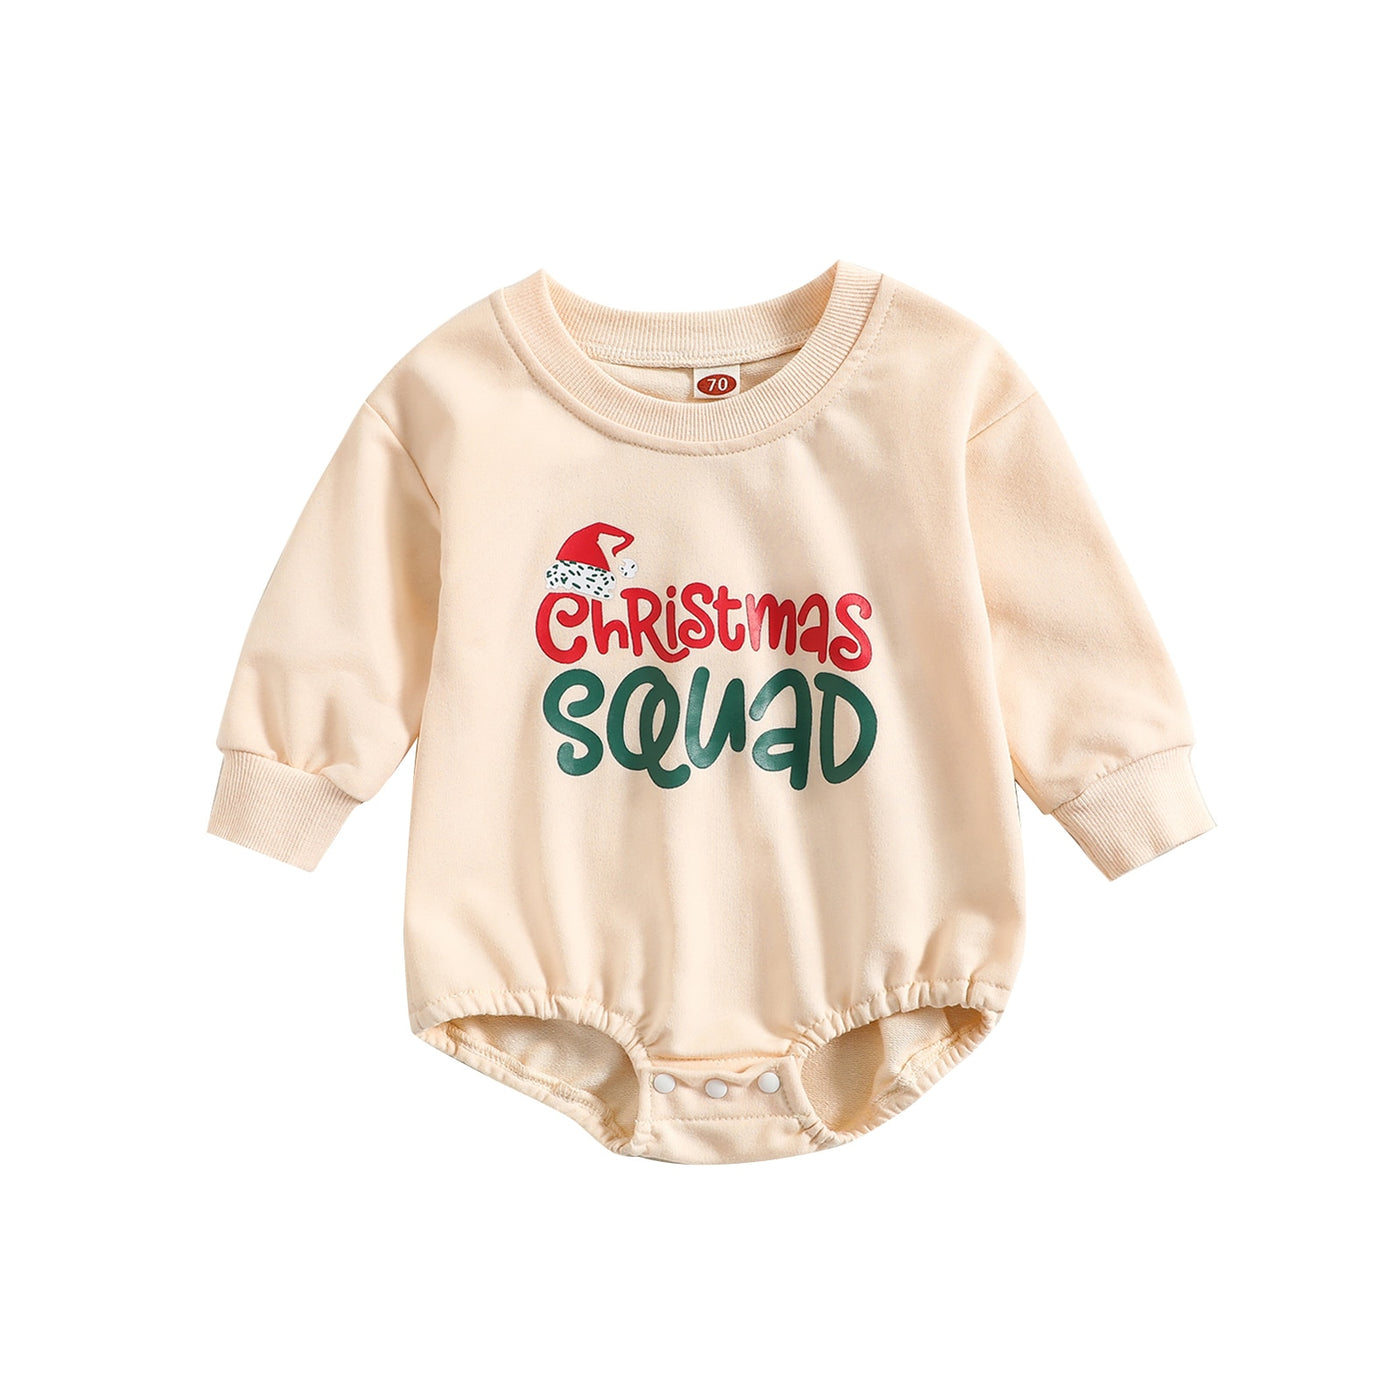 Fashion Baby Boys Girls Christmas Sweatshirts Rompers 2 Colors Santa Claus Letter Print Long Sleeve Pullover Jumsuits 0-24M Rswank